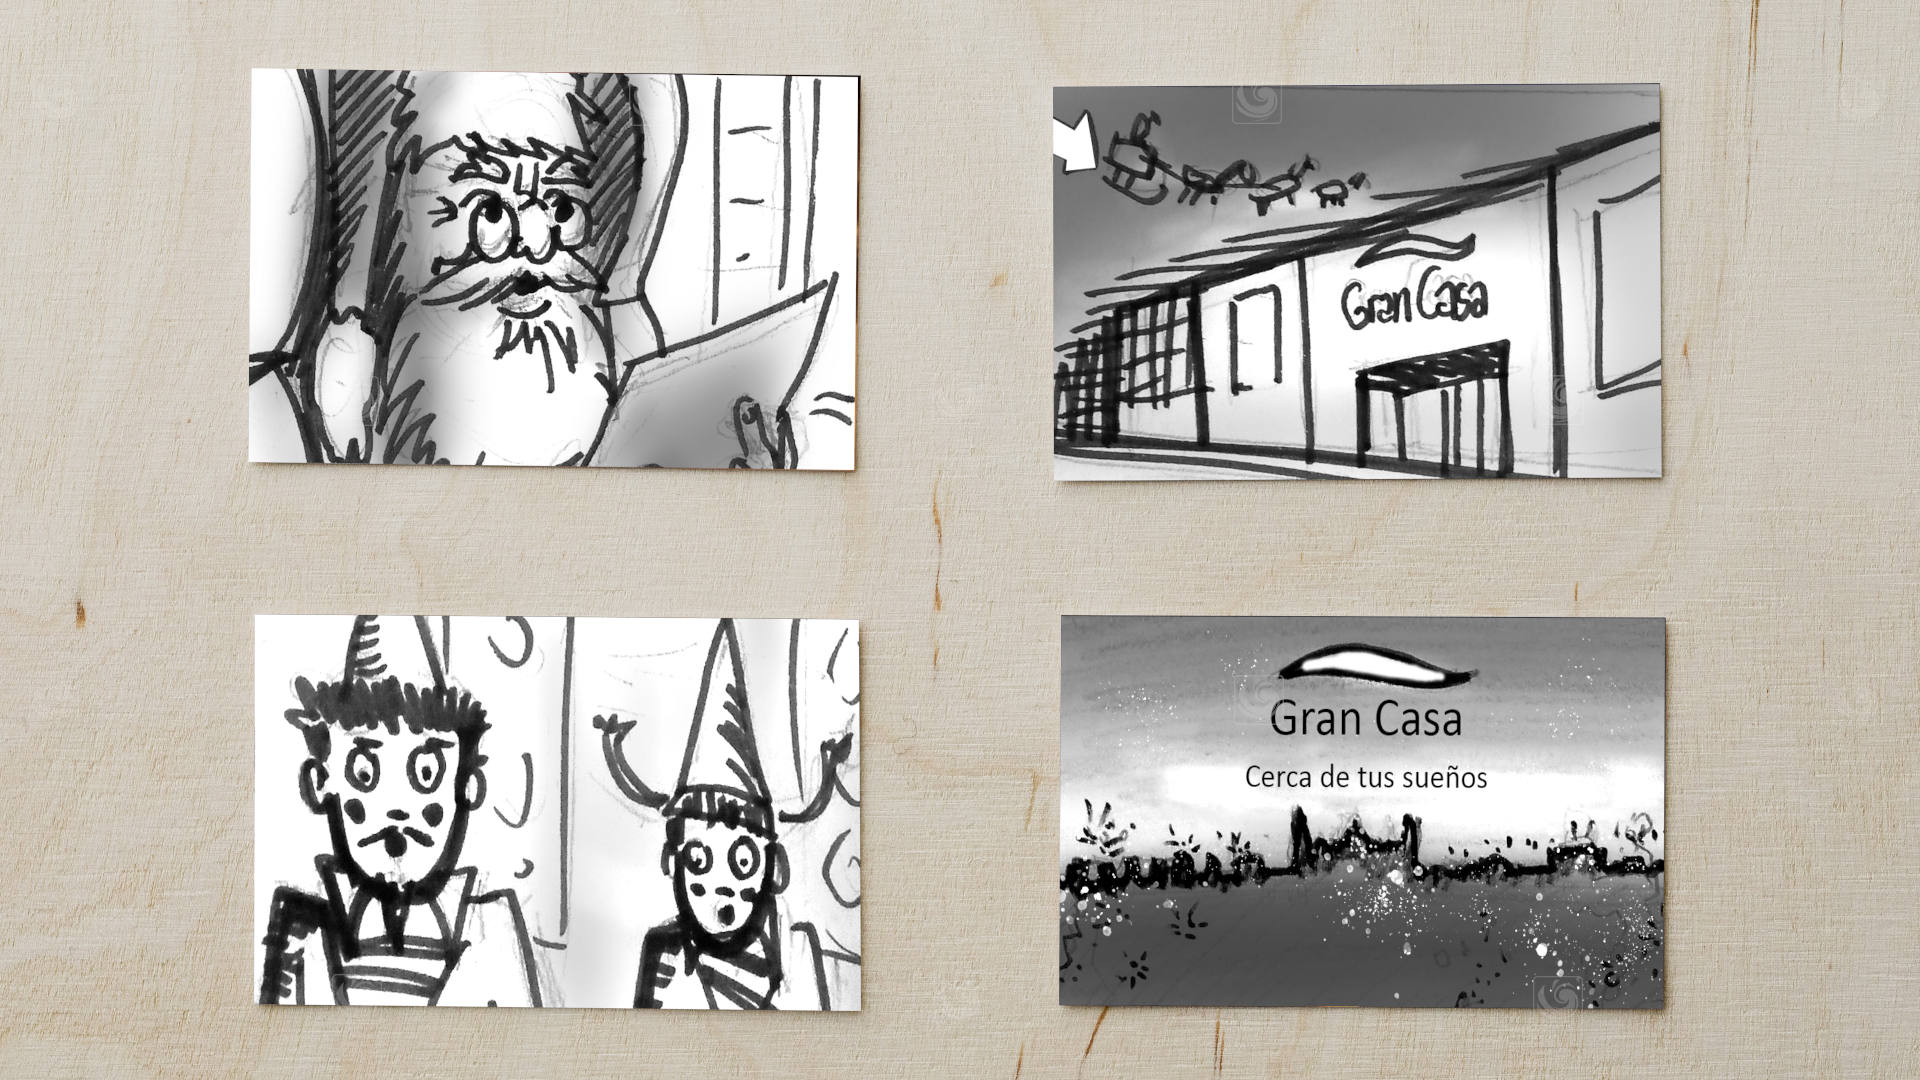 Storyboard detailing the sequence of shots in this Christmas video production for Grancasa, in Saragossa